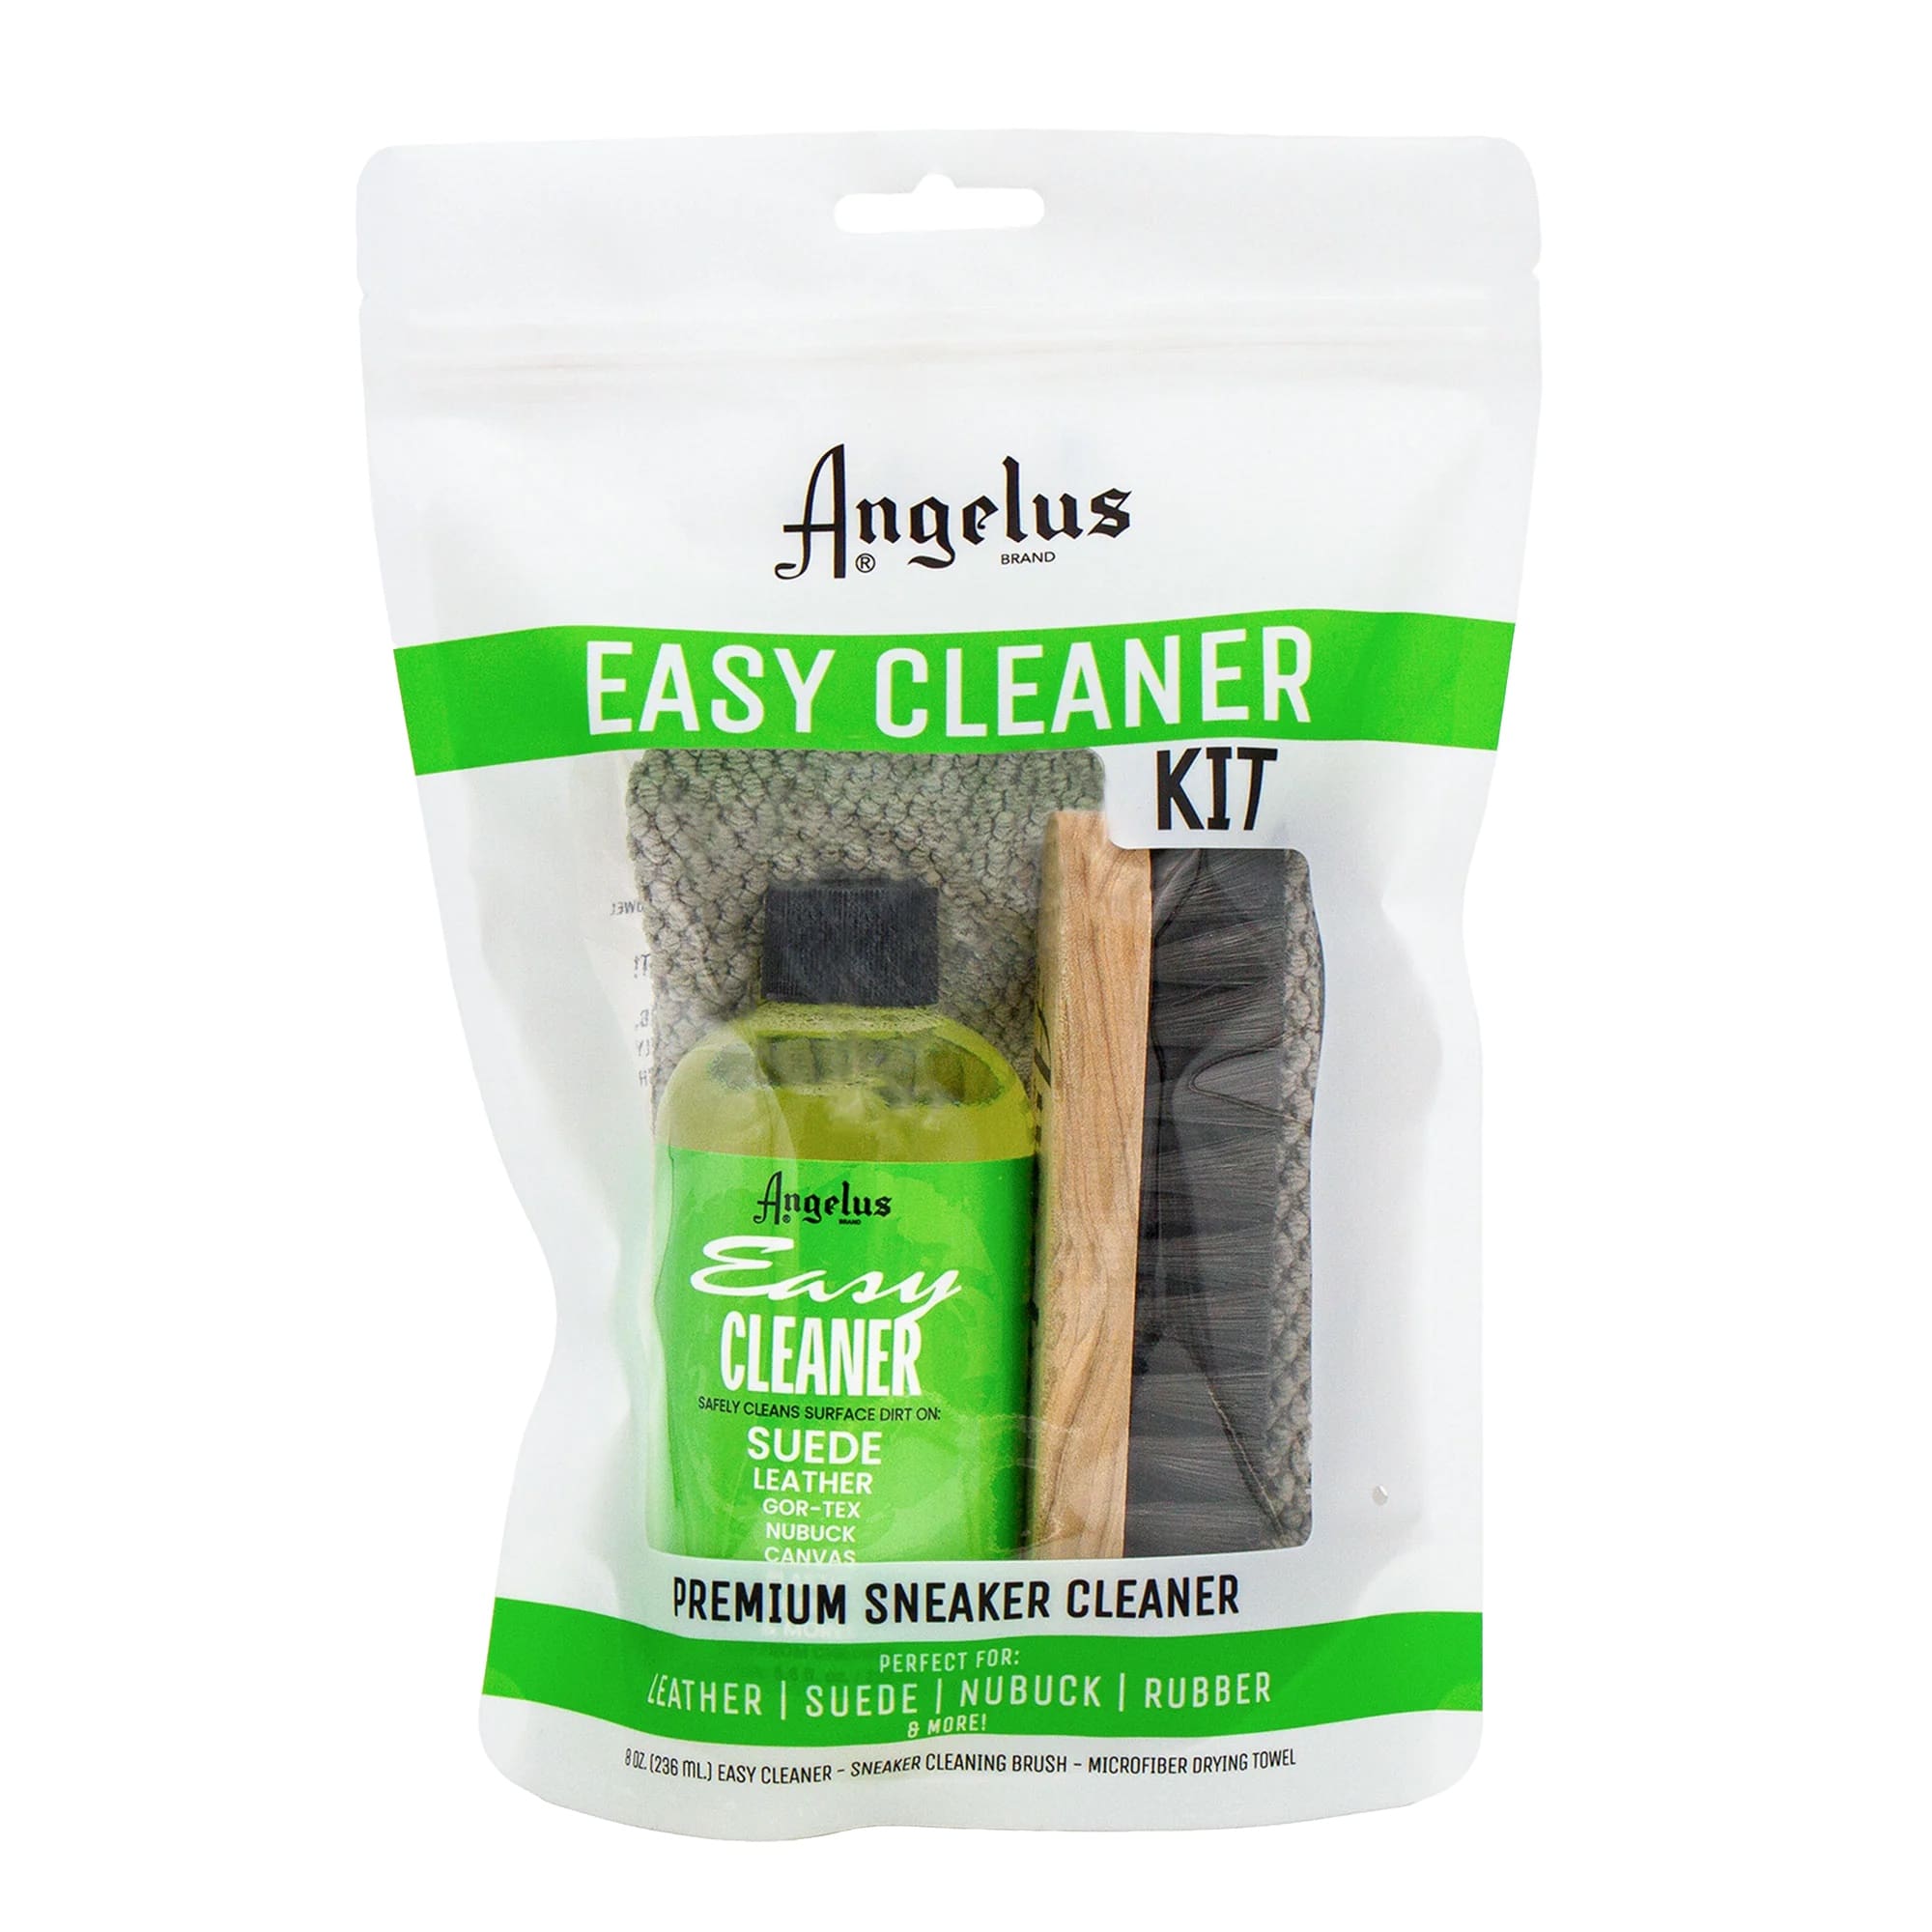 Our most popular cleaner in a convenient kit 👏⁠ ⁠ Angelus Direct